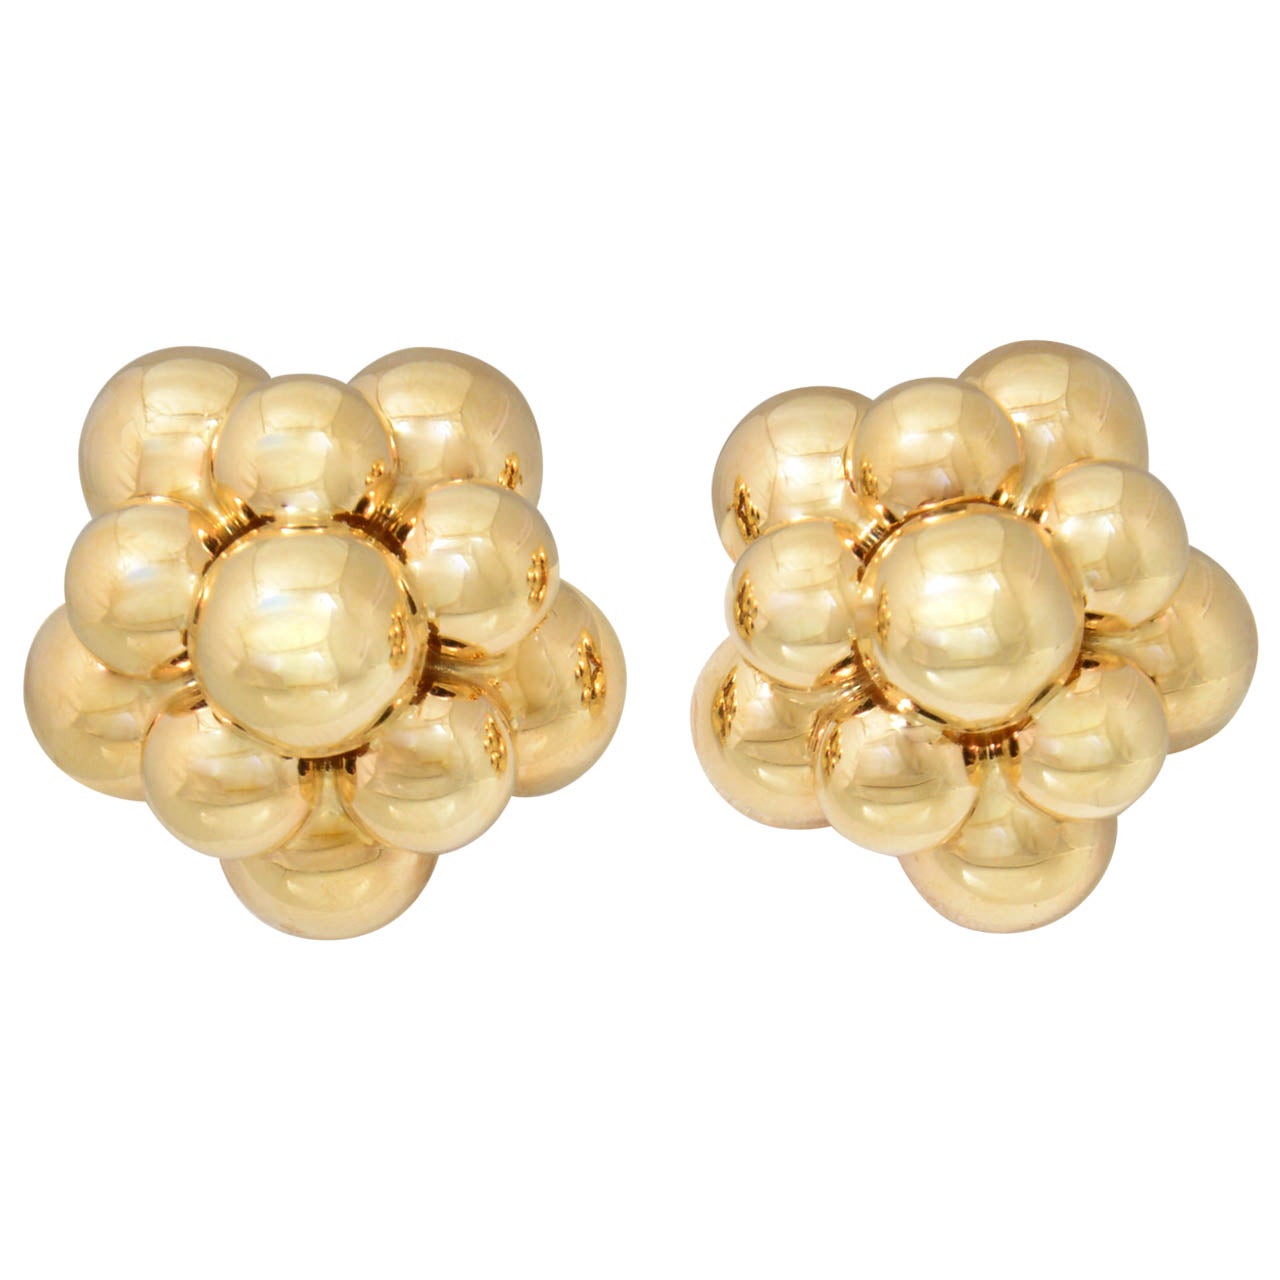 Highly Stylized Gold Bubble Ball Earrings